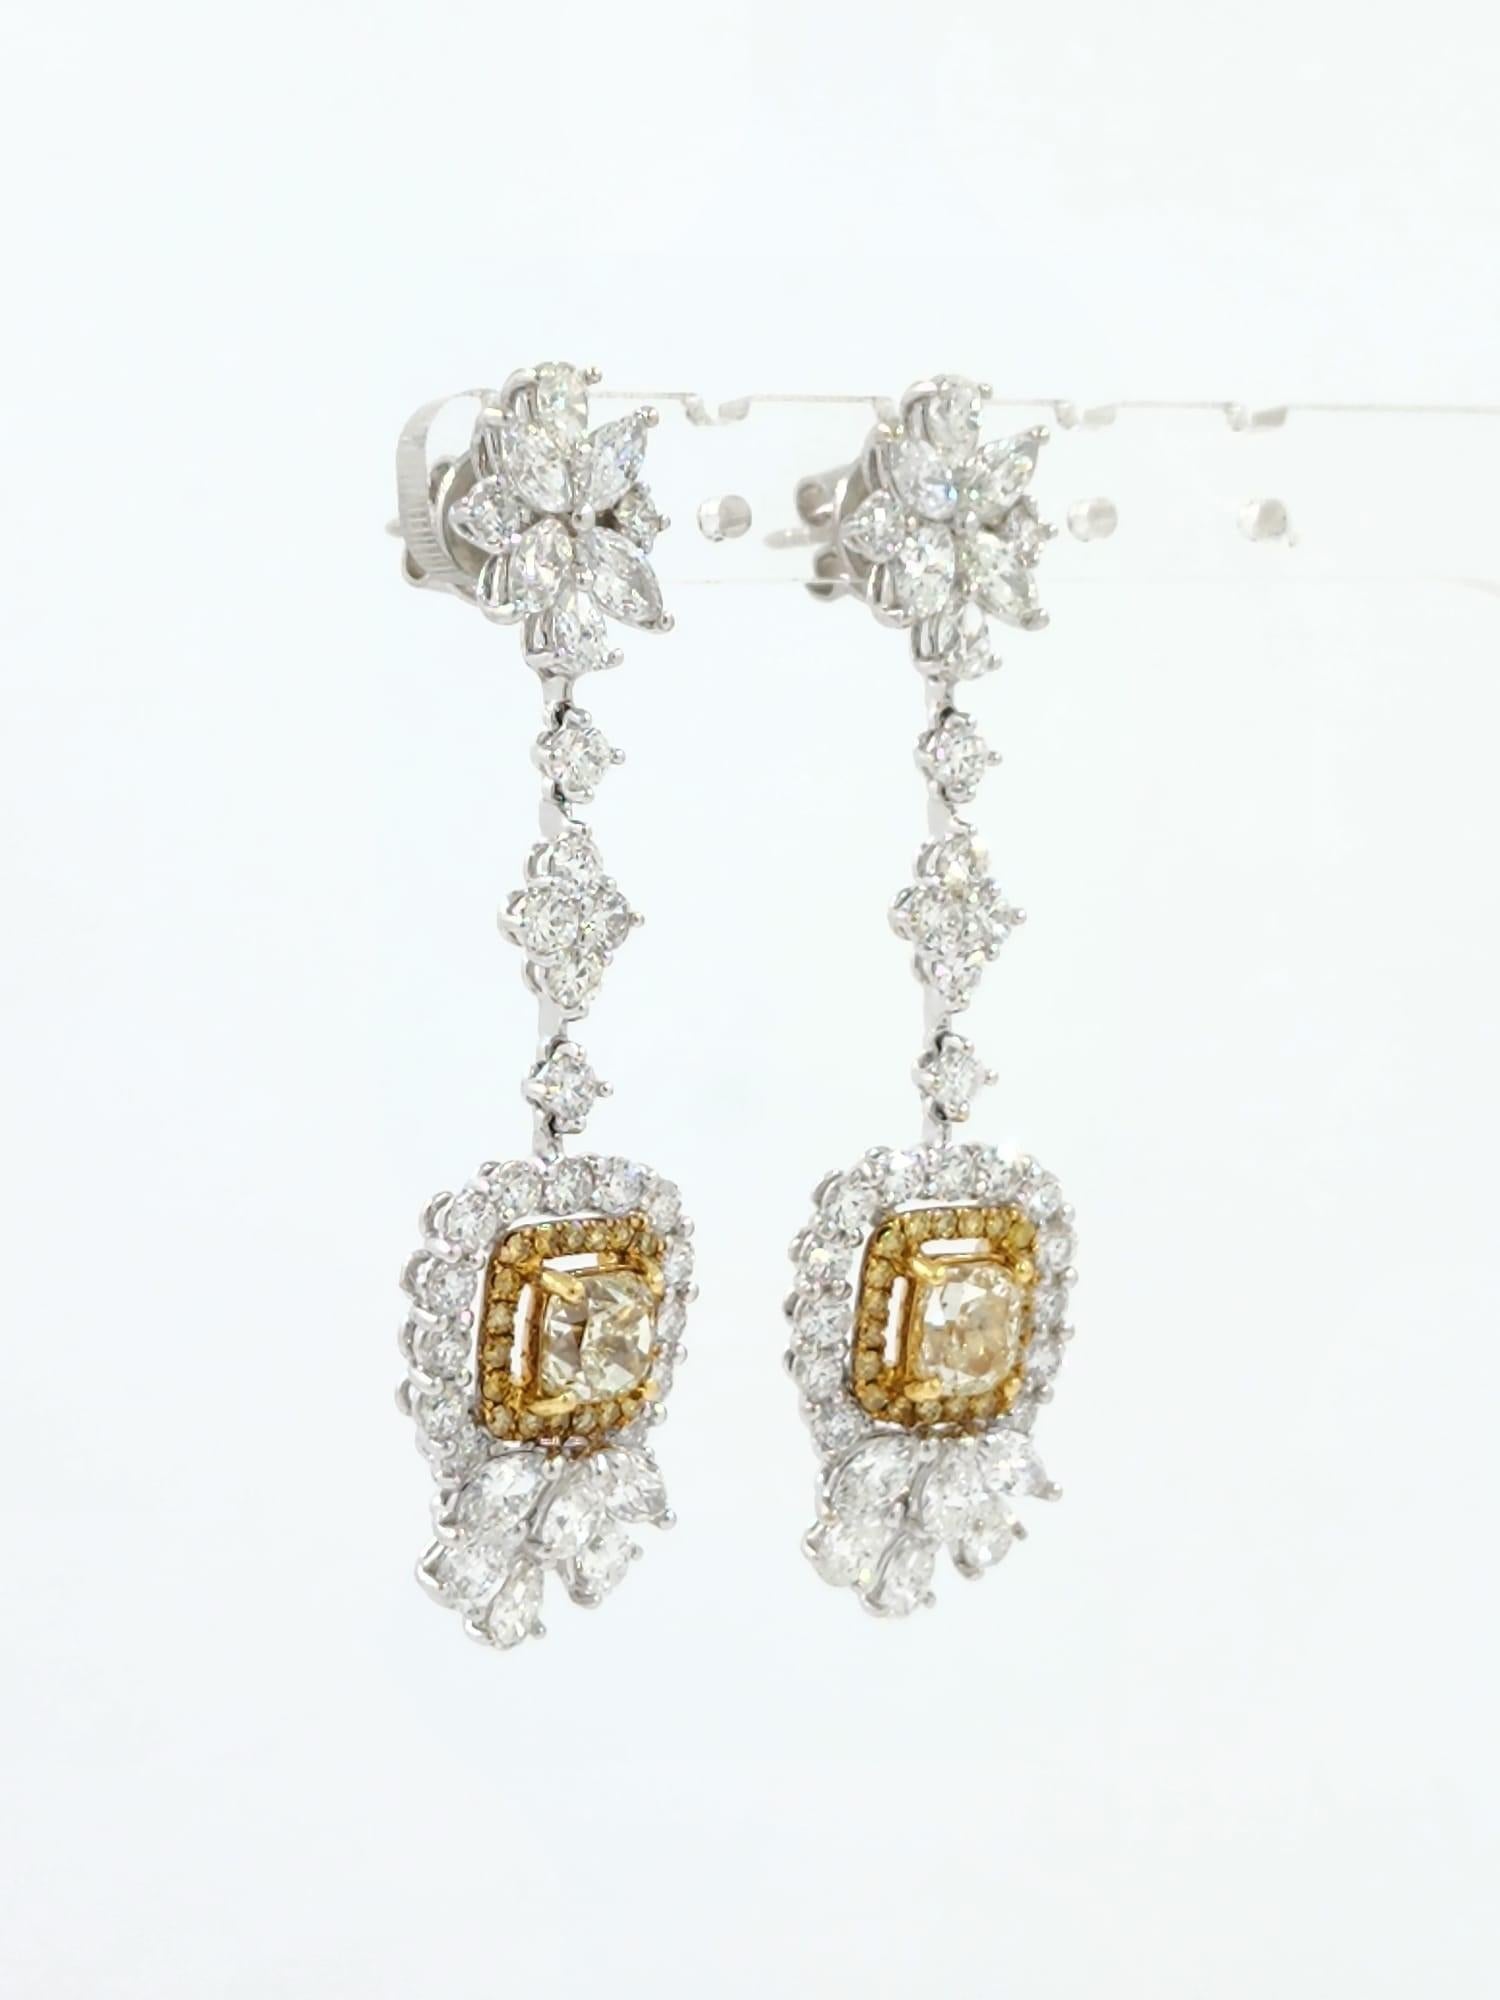 Introducing our stunning dangle earrings, the perfect addition to your jewelry collection. These exquisite earrings feature a total of 2.42 carats of brilliant yellow diamonds, which catch the light beautifully and add a pop of color to any outfit.